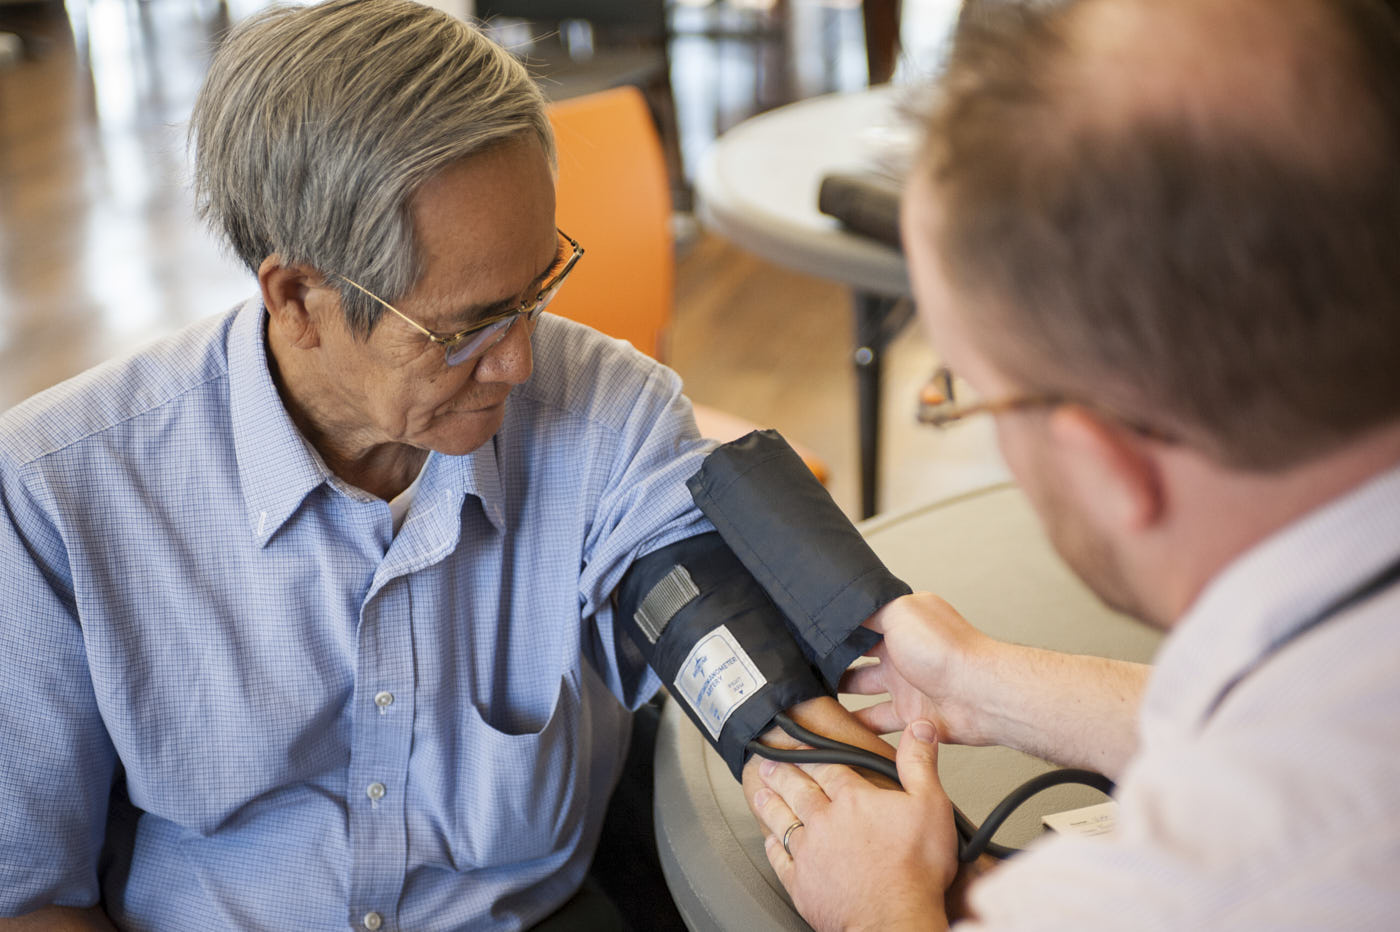 A man receiving a medical checkup with a blood pressure cuff